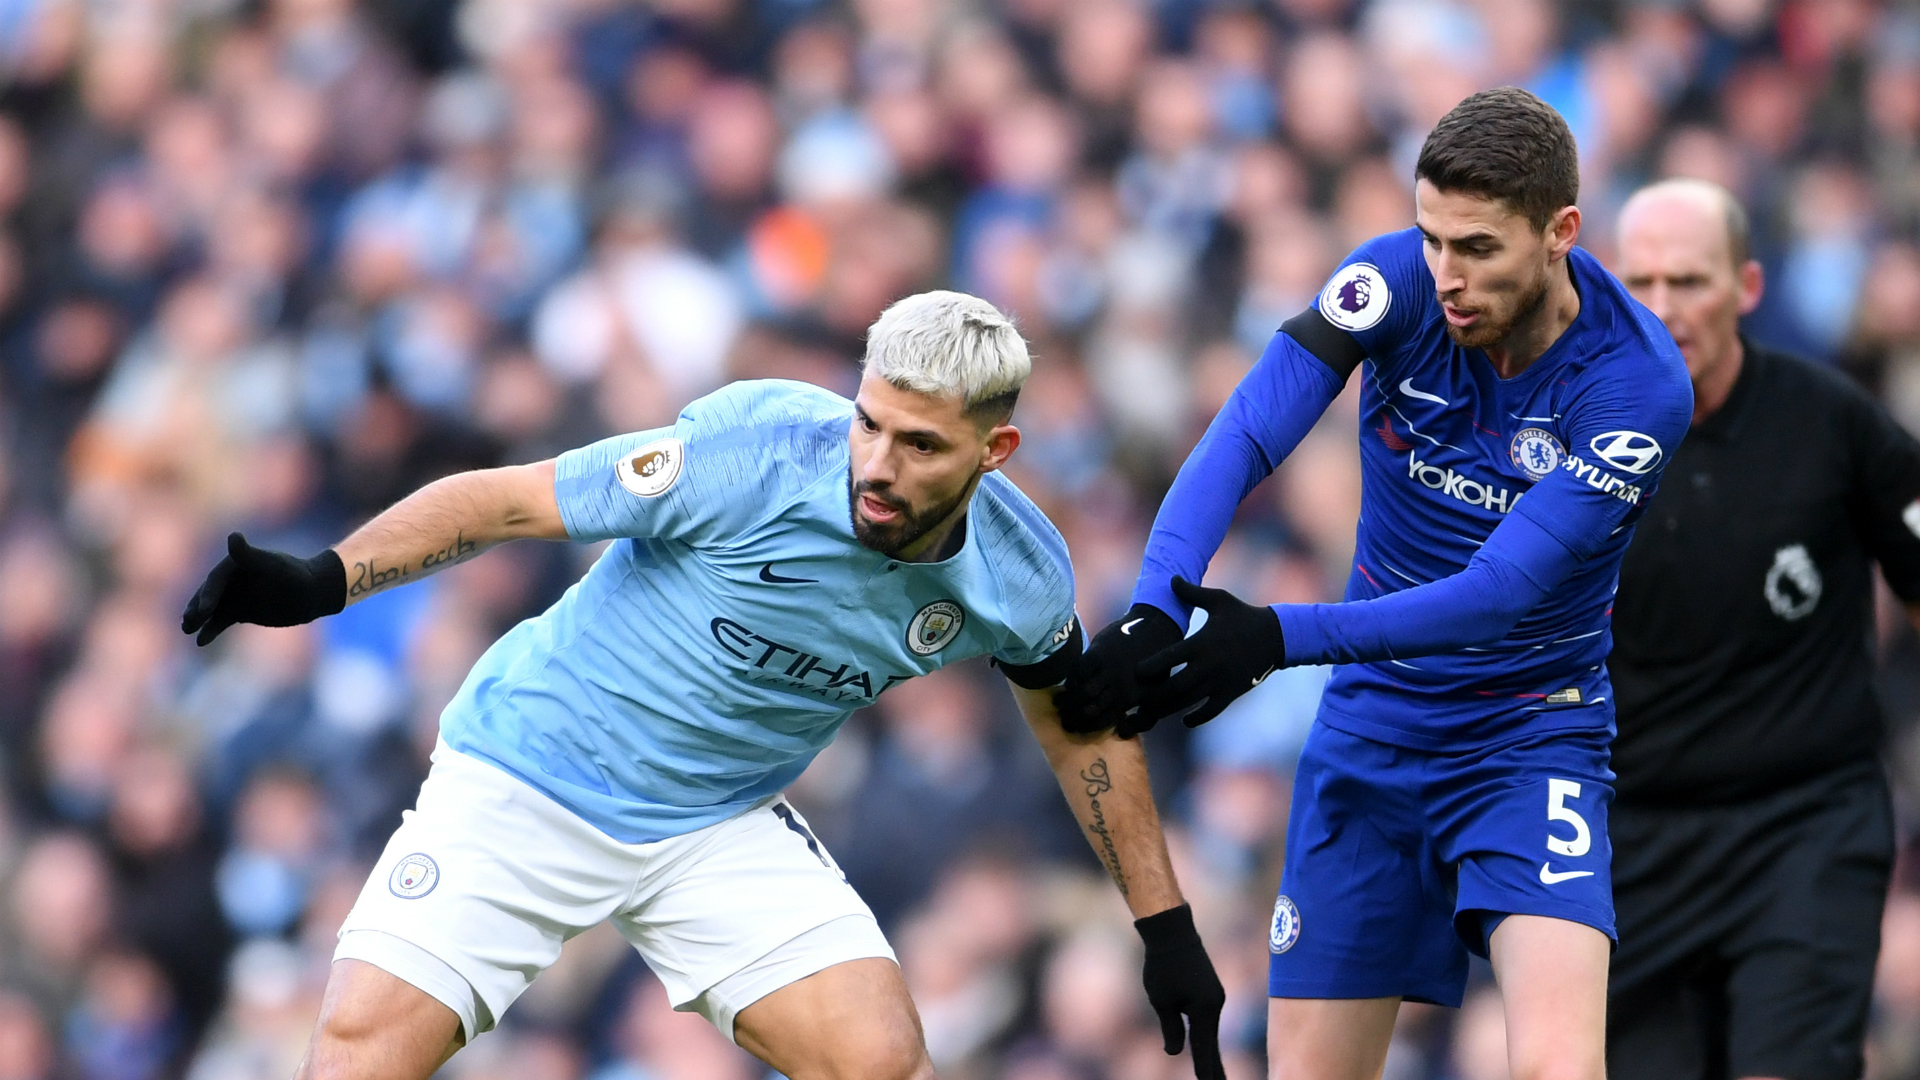 Manchester City host Chelsea in this weekend's standout Premier League fixture, with the champions in desperate need of victory.